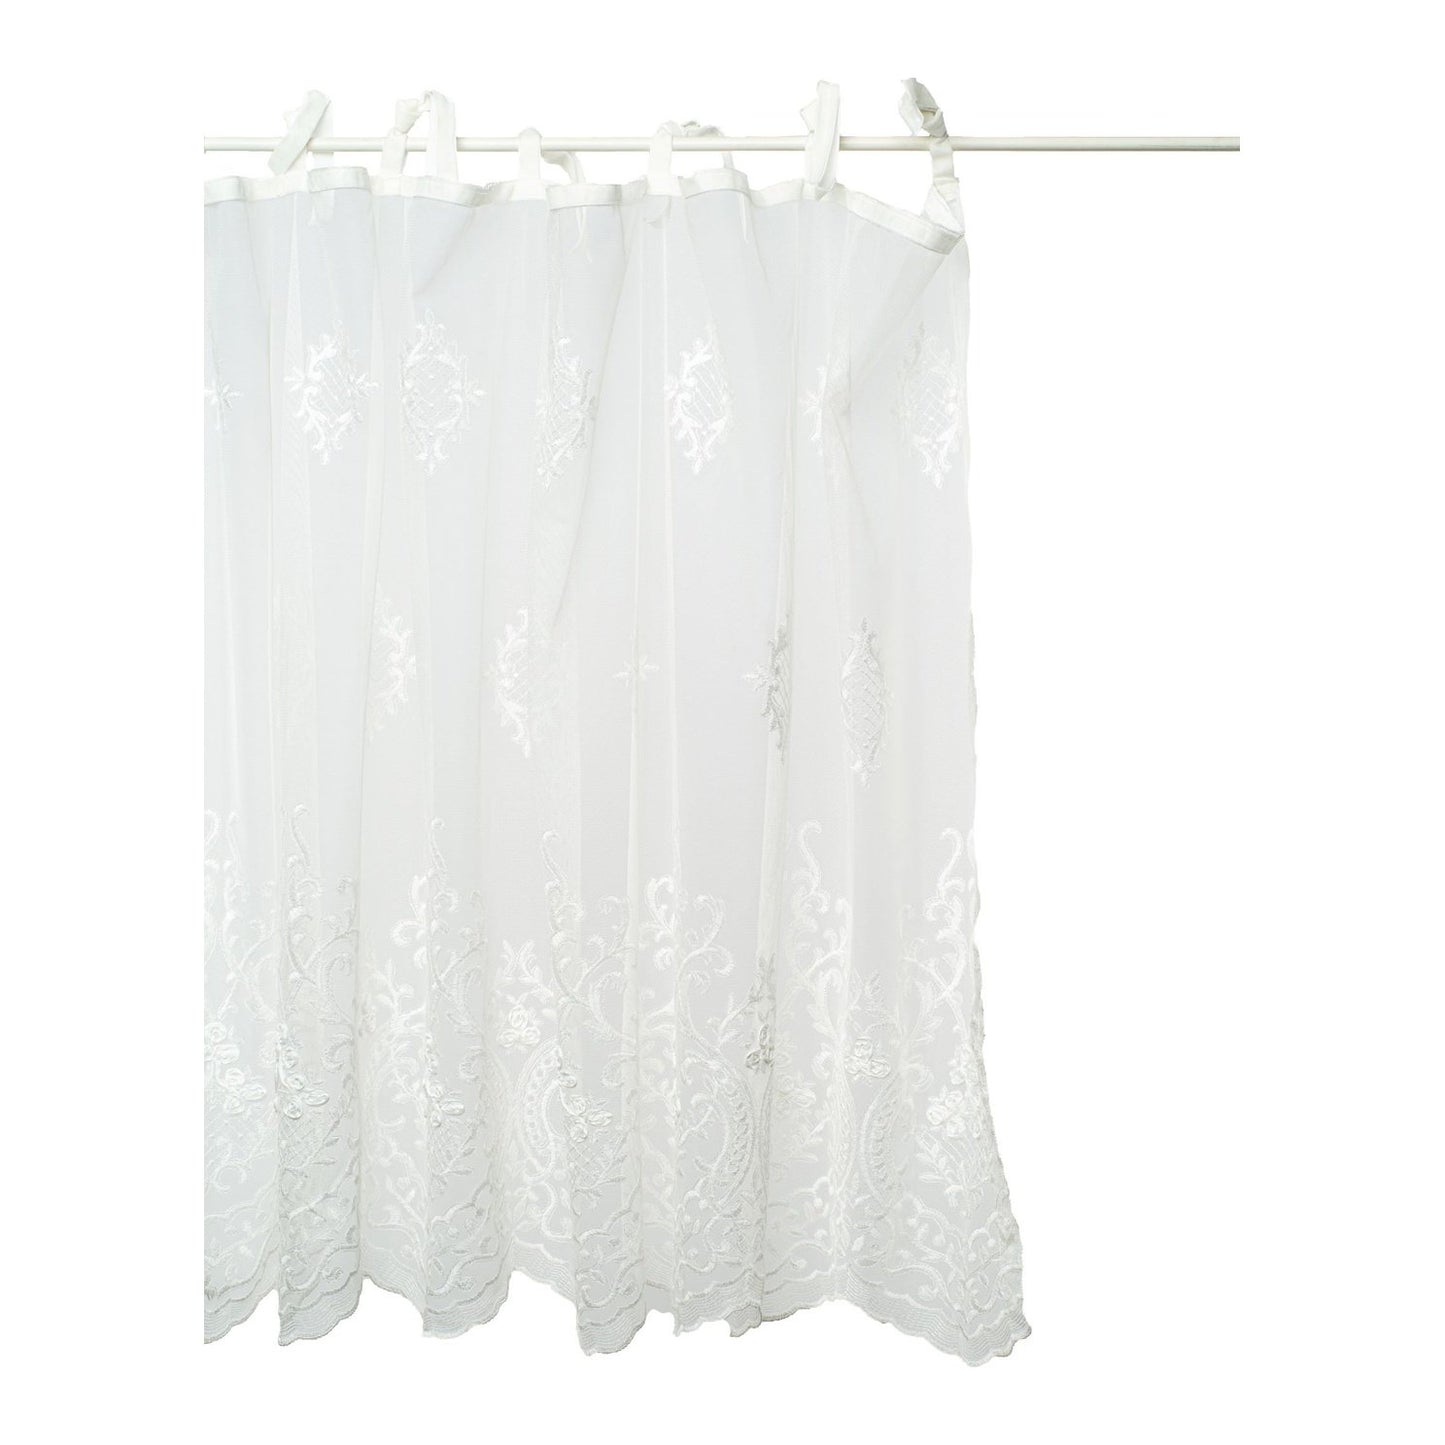 Transform any window into a romantic haven with the Audrey Lace Curtain.